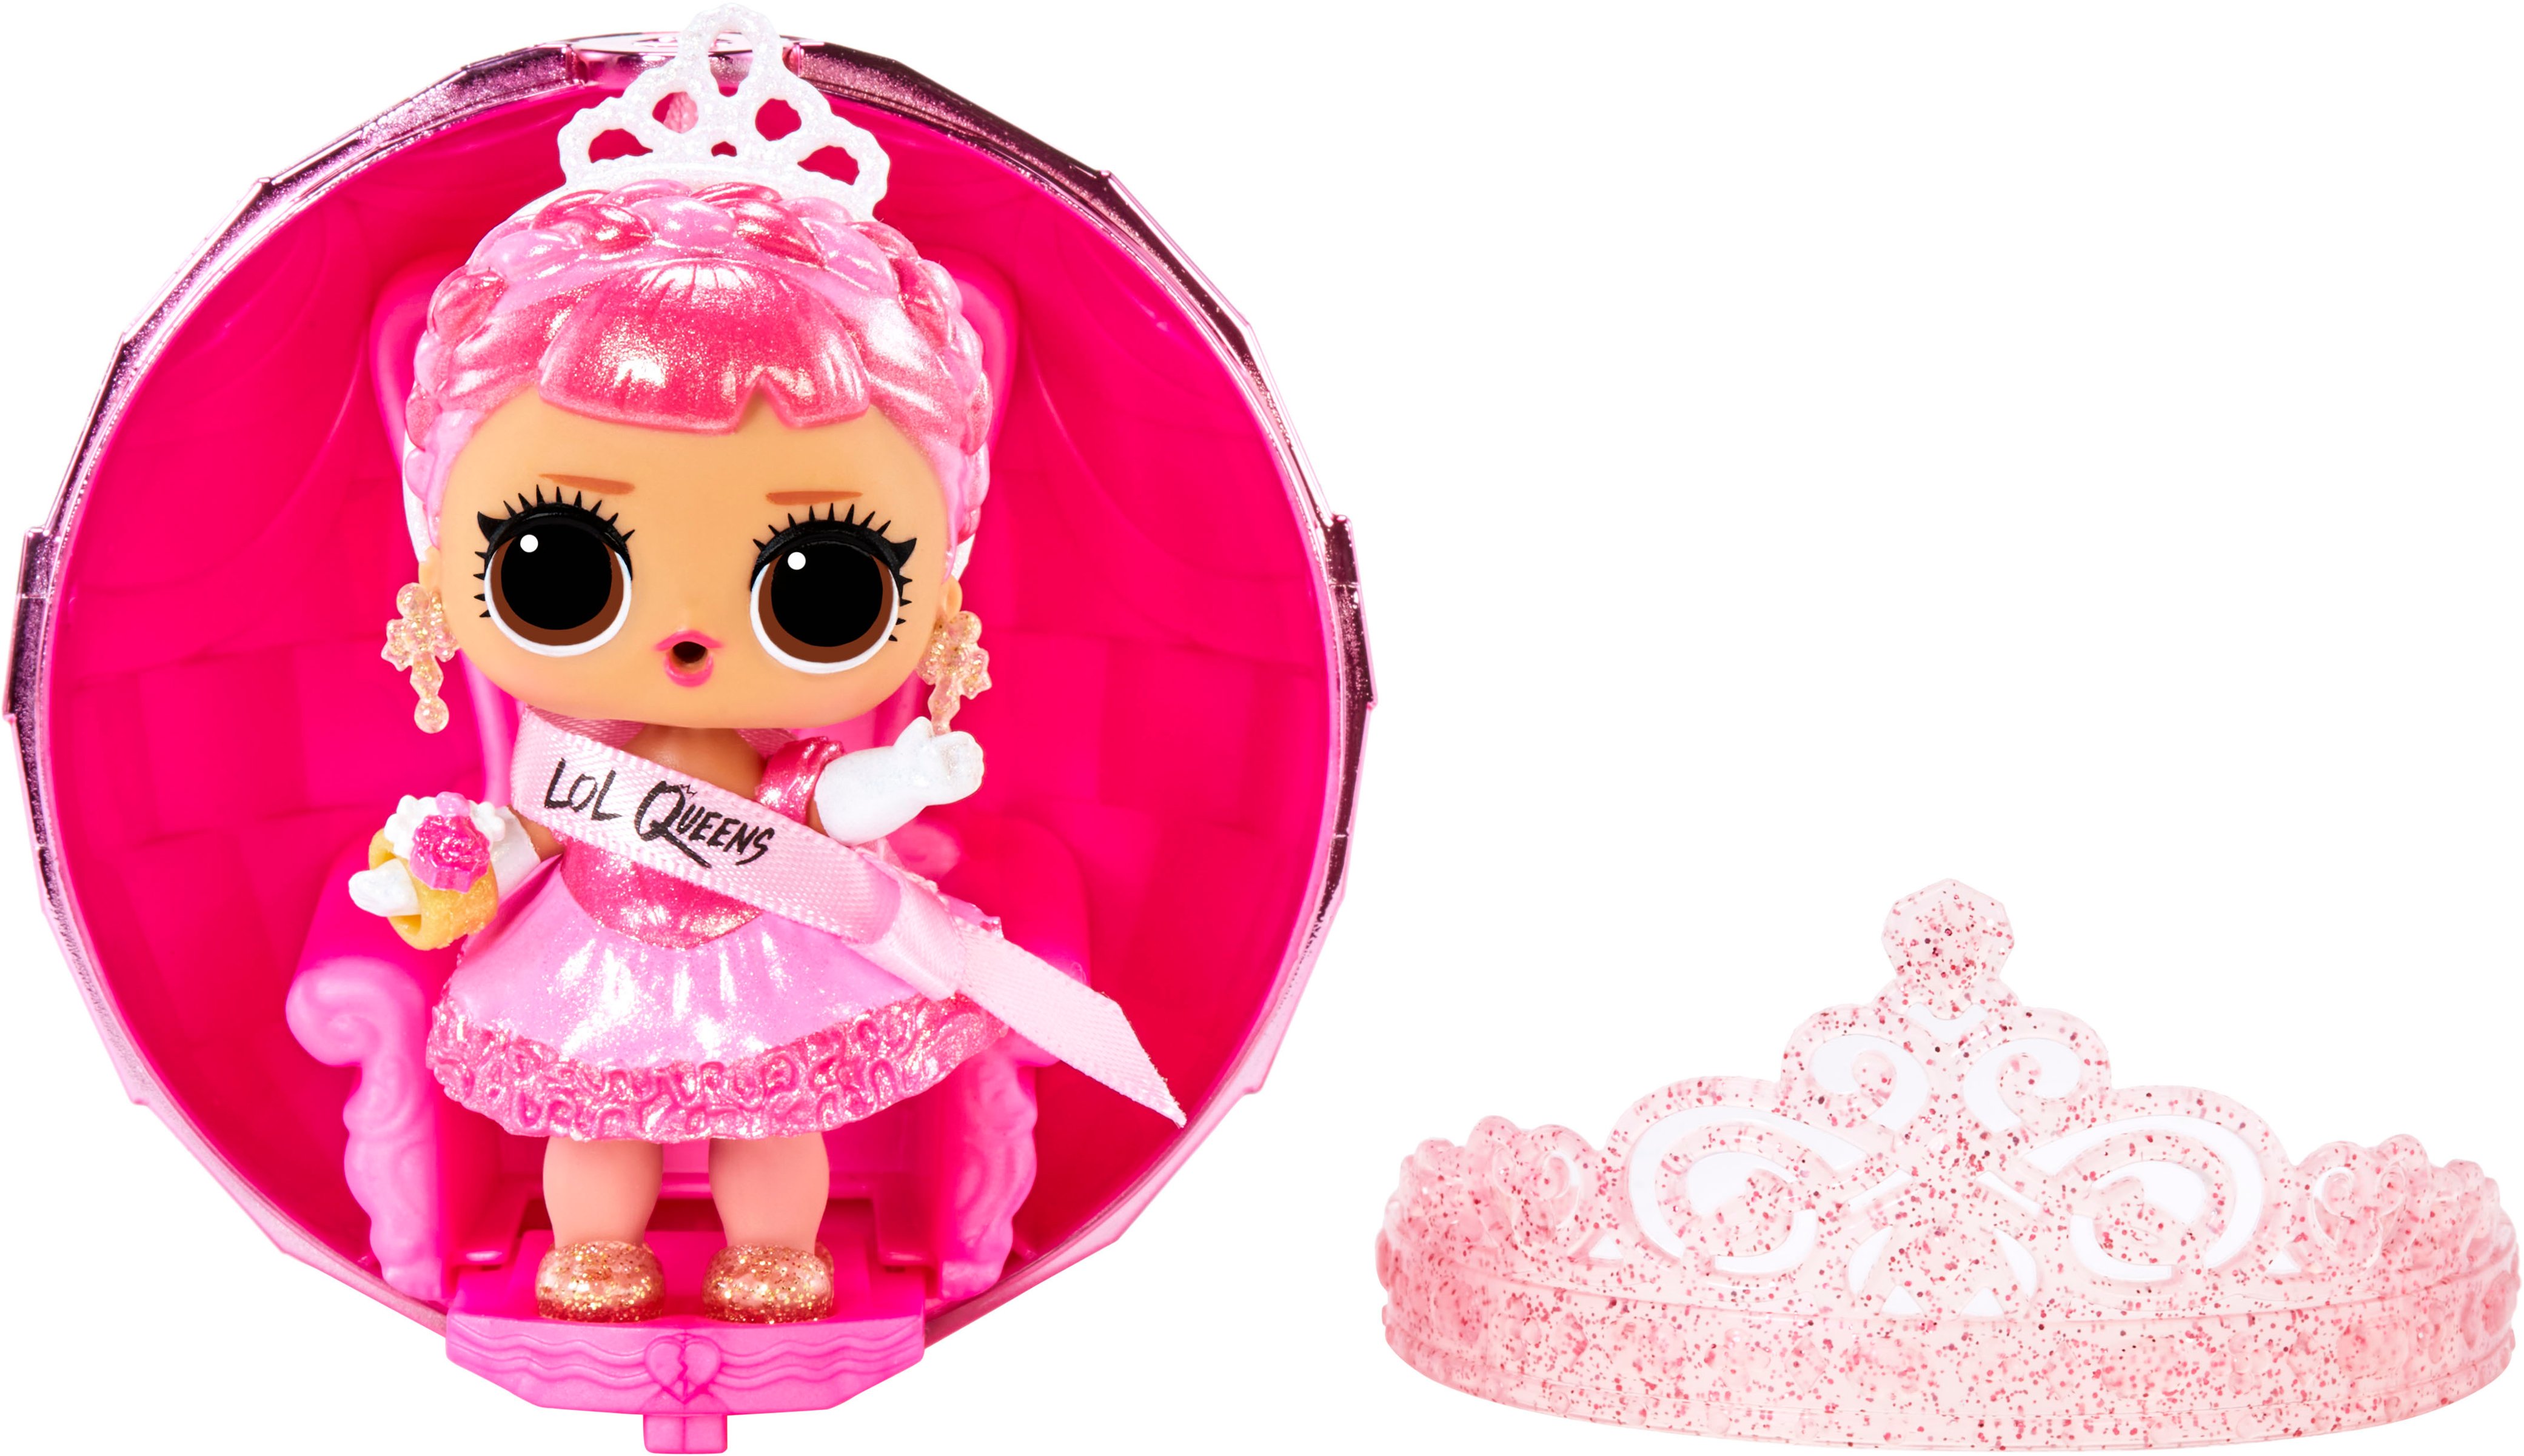 L.O.L. Surprise! PhD B.B. Doll Pink And White 572527 - Best Buy